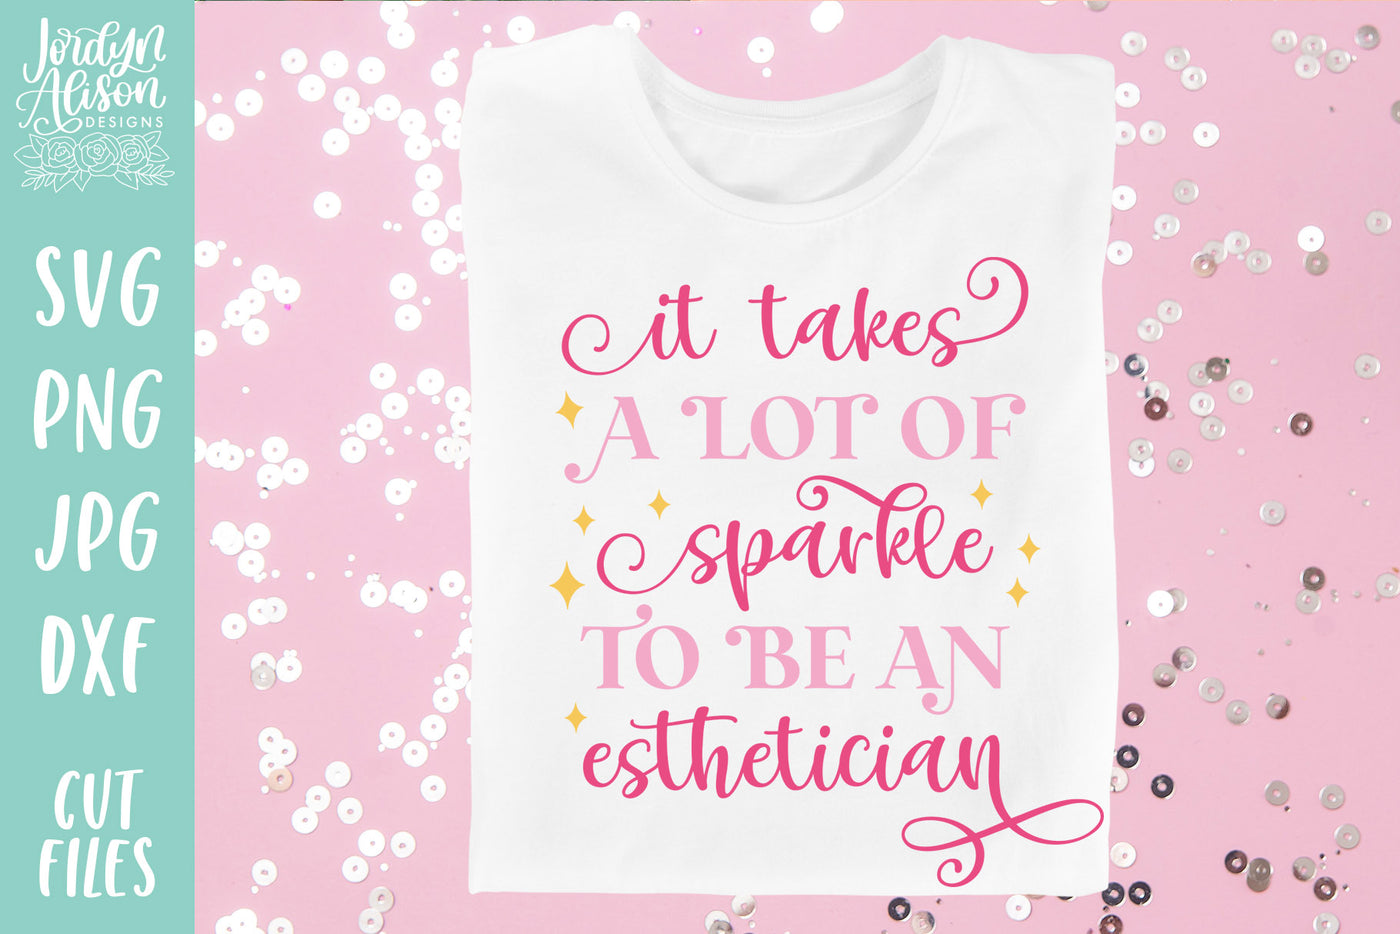 Lot of Sparkle to be an Esthetician SVG